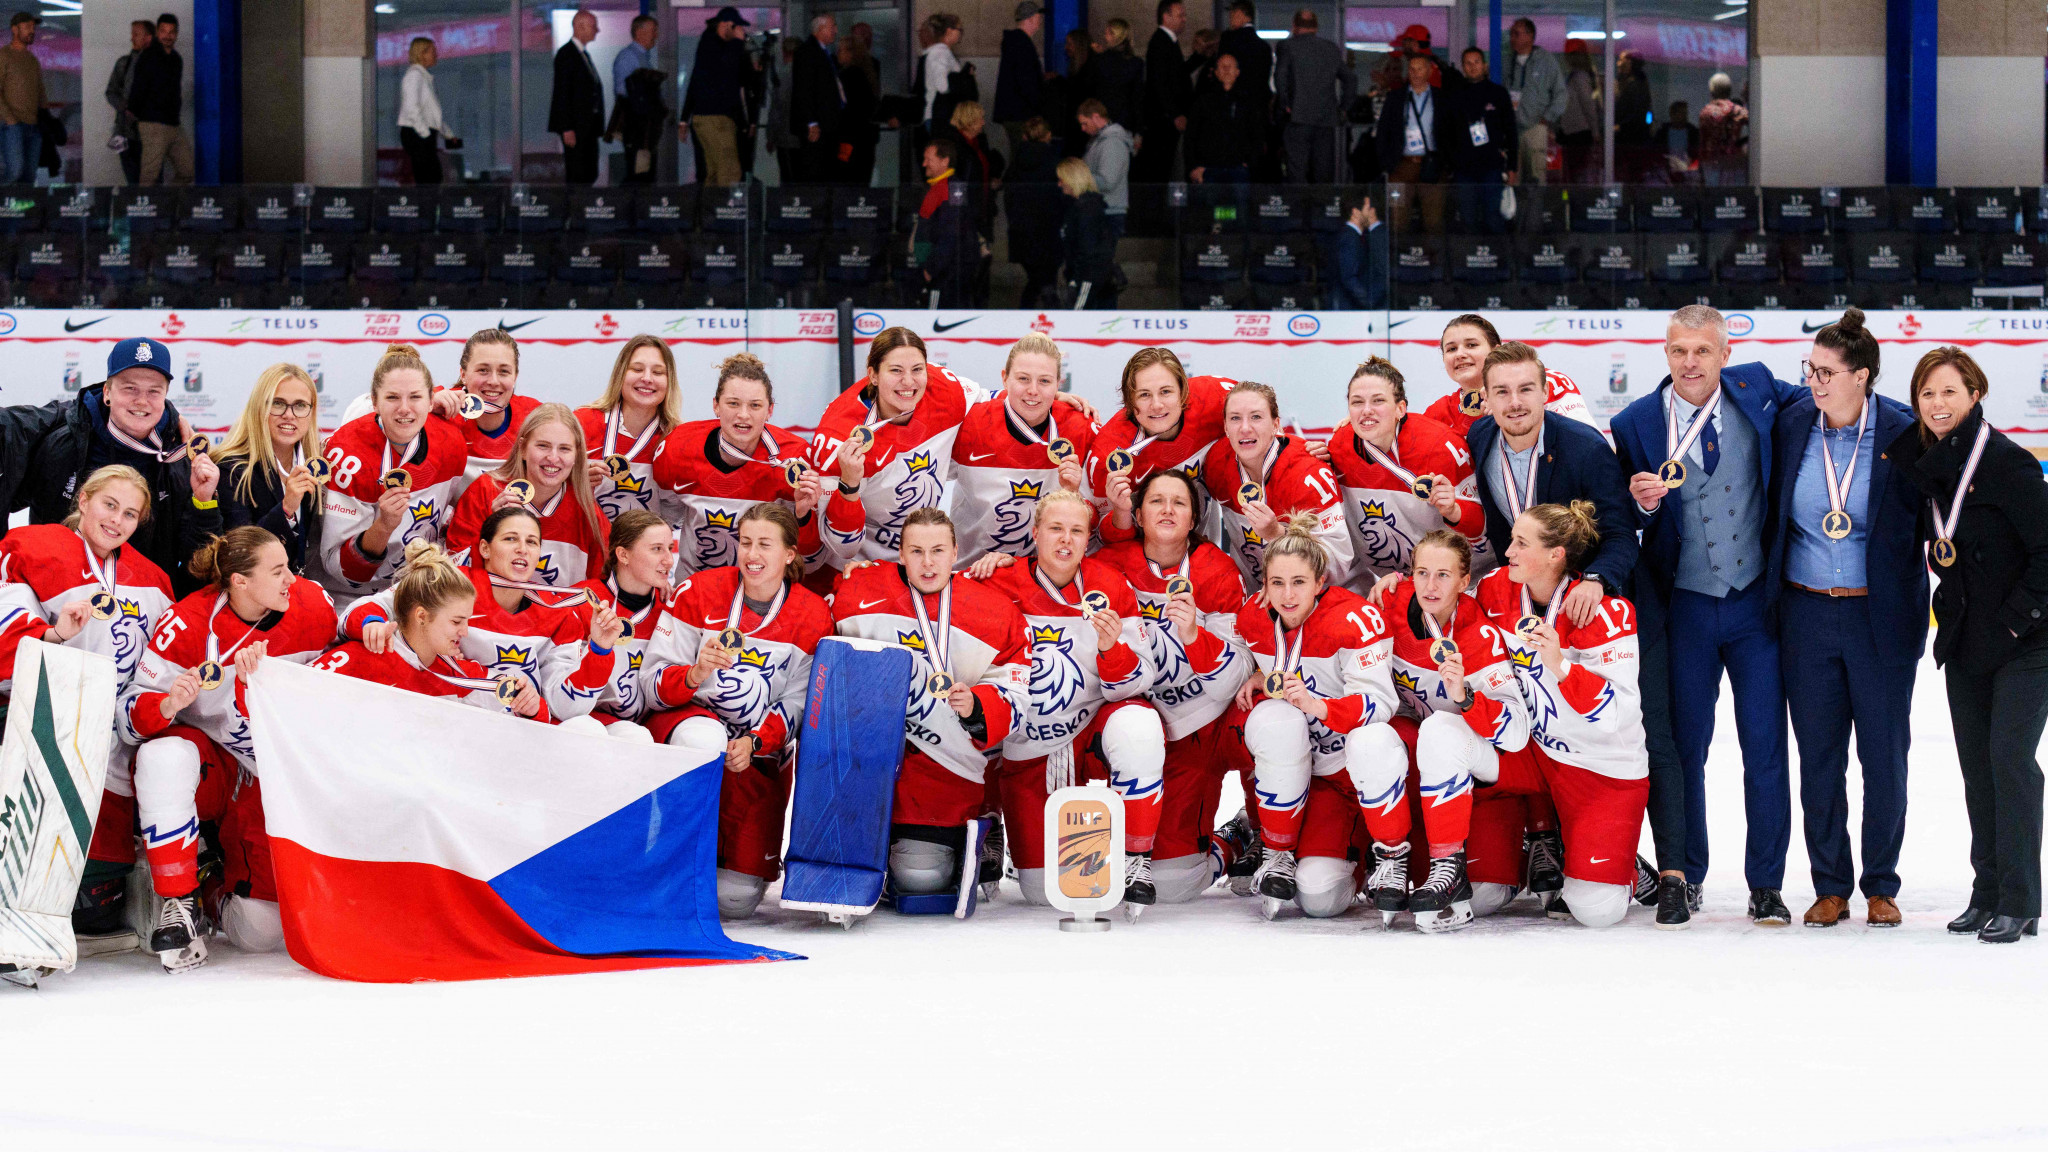 The Czech Republic beat Switzerland 4-2 to earn their first podium finish at the IIHF Women's World Championship ©Getty Images